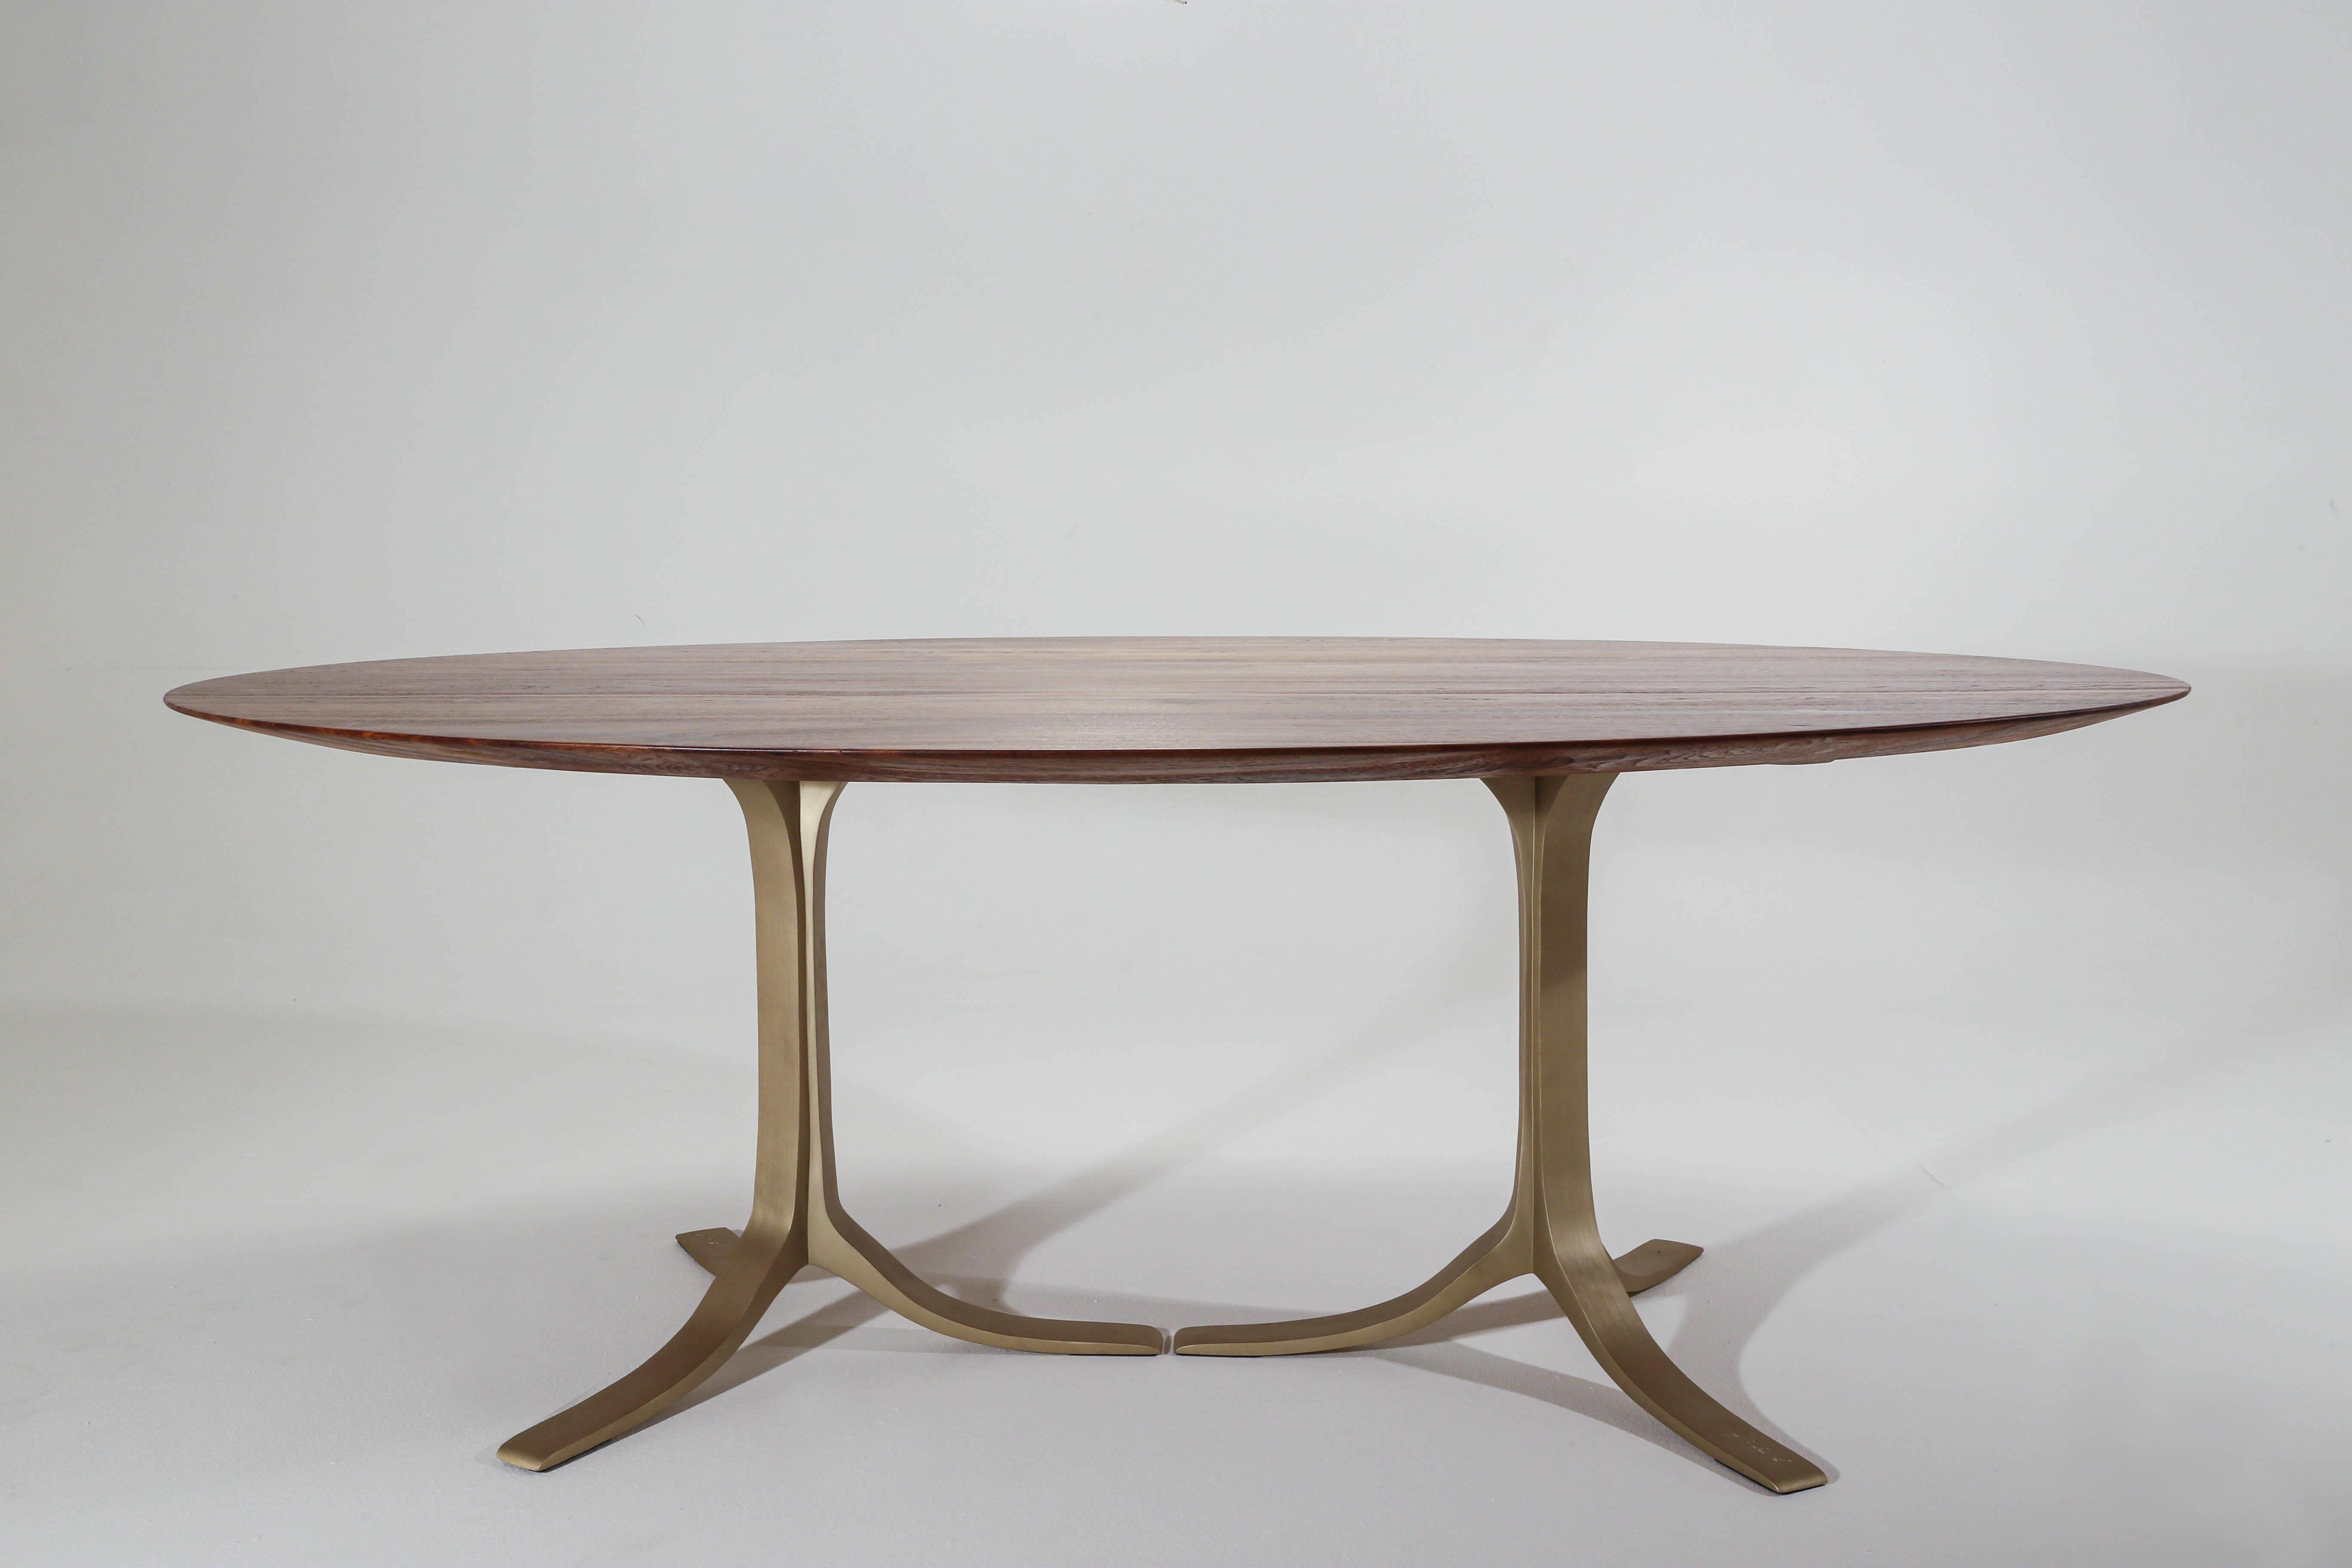 We created this oval table for a client in München, Germany. After hearing about the client's space we suggested this 'Golden Section Oval', a perfect oval within a perfectly proportioned recangle. The client selected reclaimed Golden Teak we